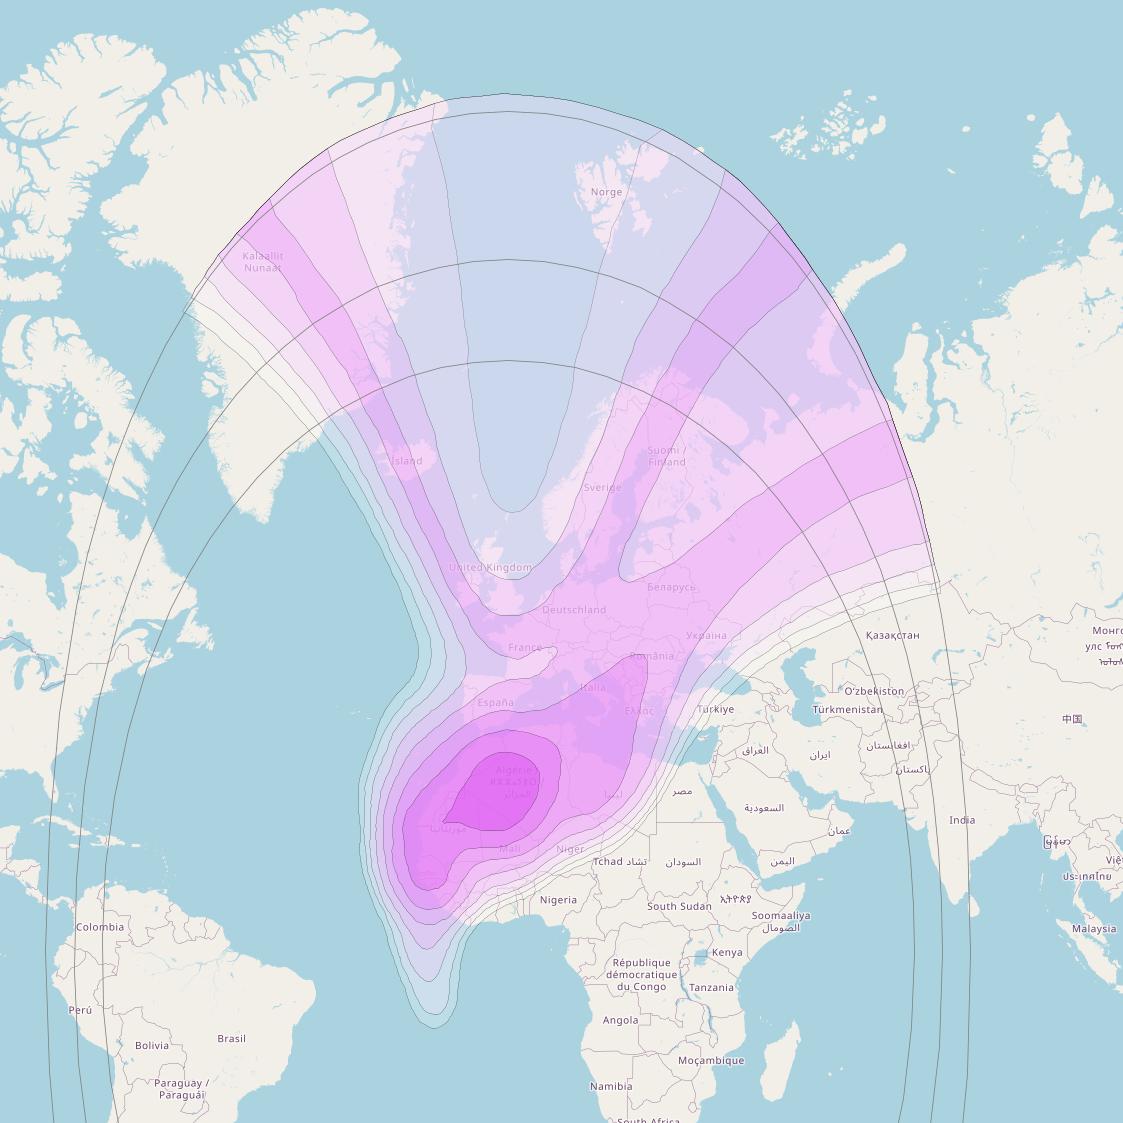 Intelsat 10-02 + MEV2 at 1° W downlink C-band North East Zone Beam coverage map